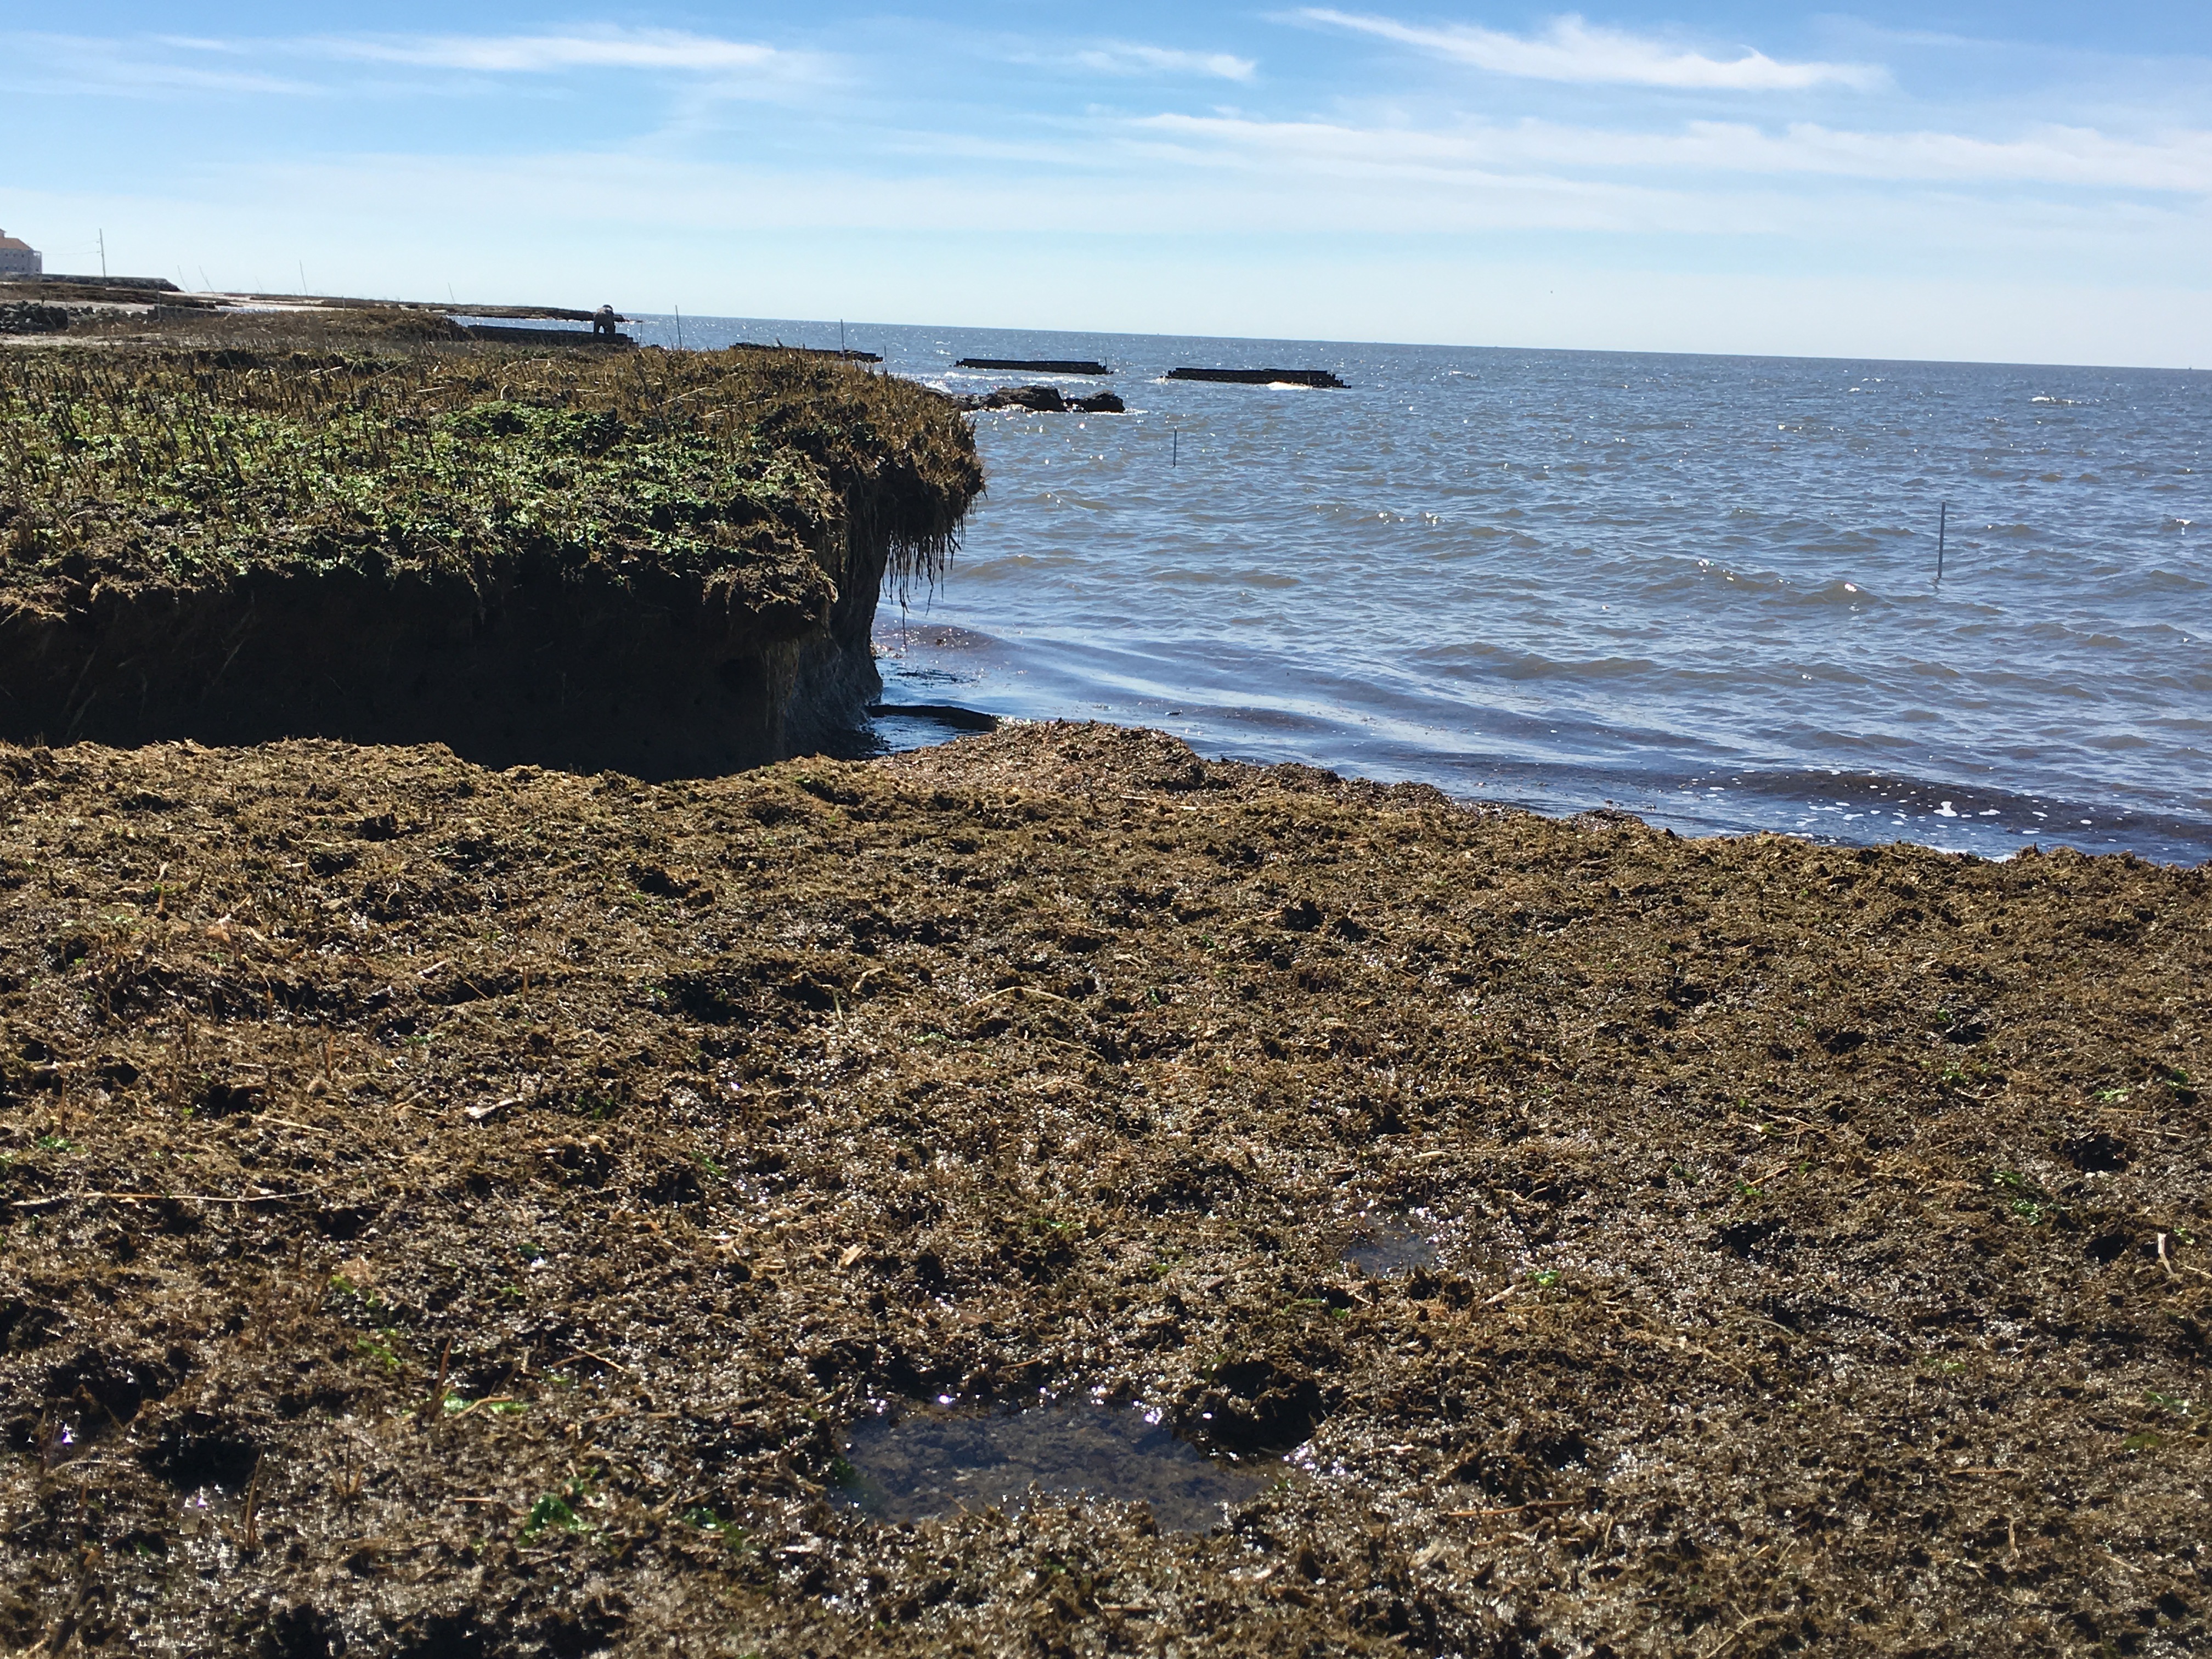 Eroding marsh edge along Gandy's Beach, NJ and the Delaware Bay (Oyster Castles are visible in the background).